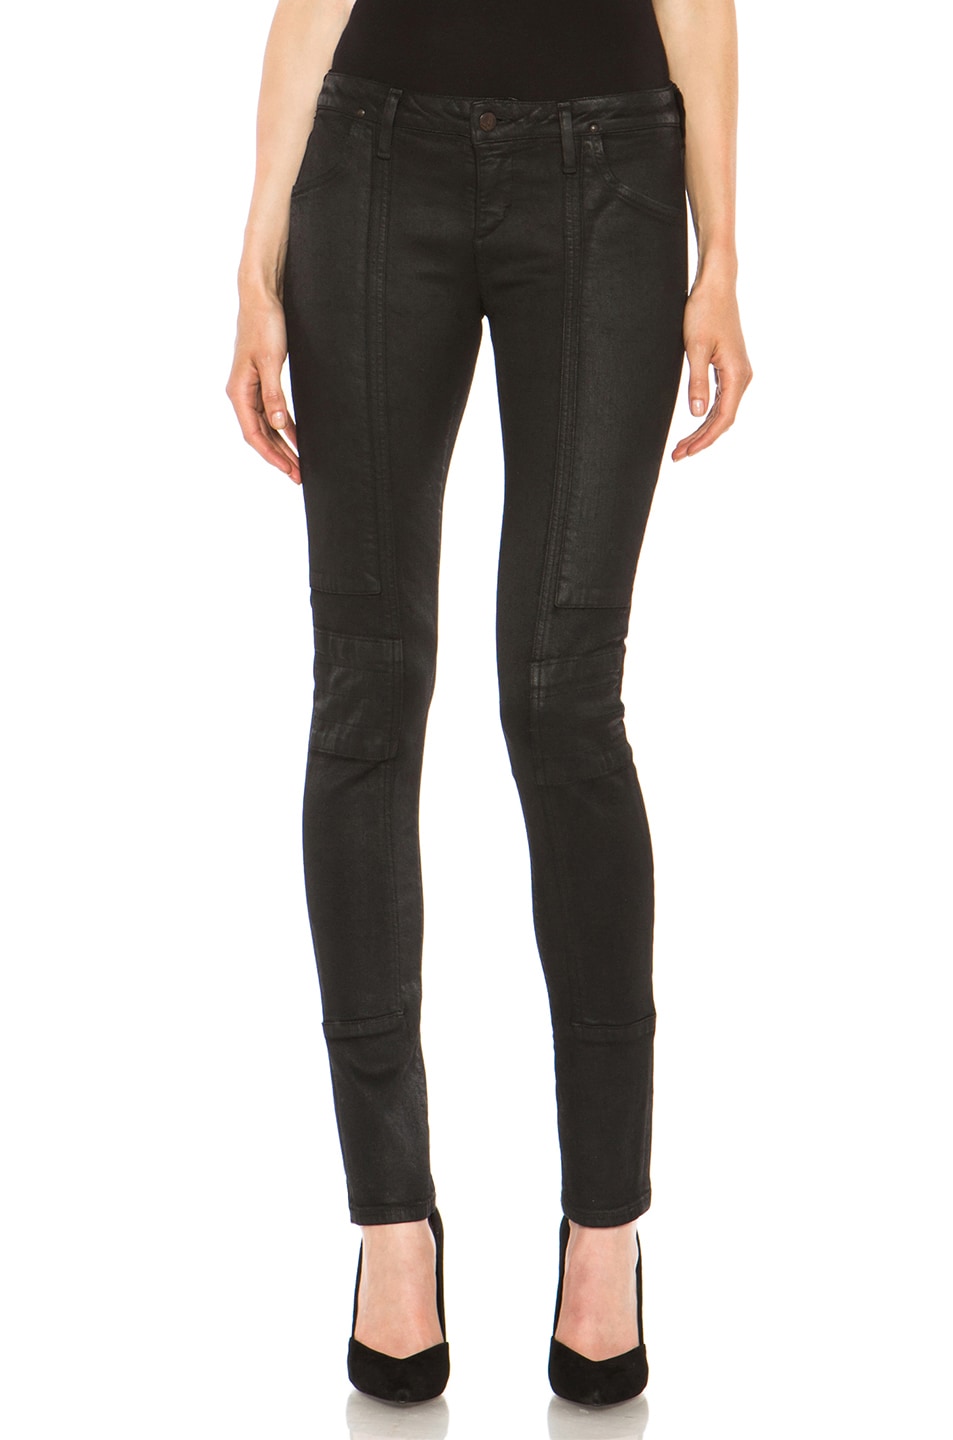 Image 1 of Citizens of Humanity Jeans Logan Moto Pant in Sueded Black